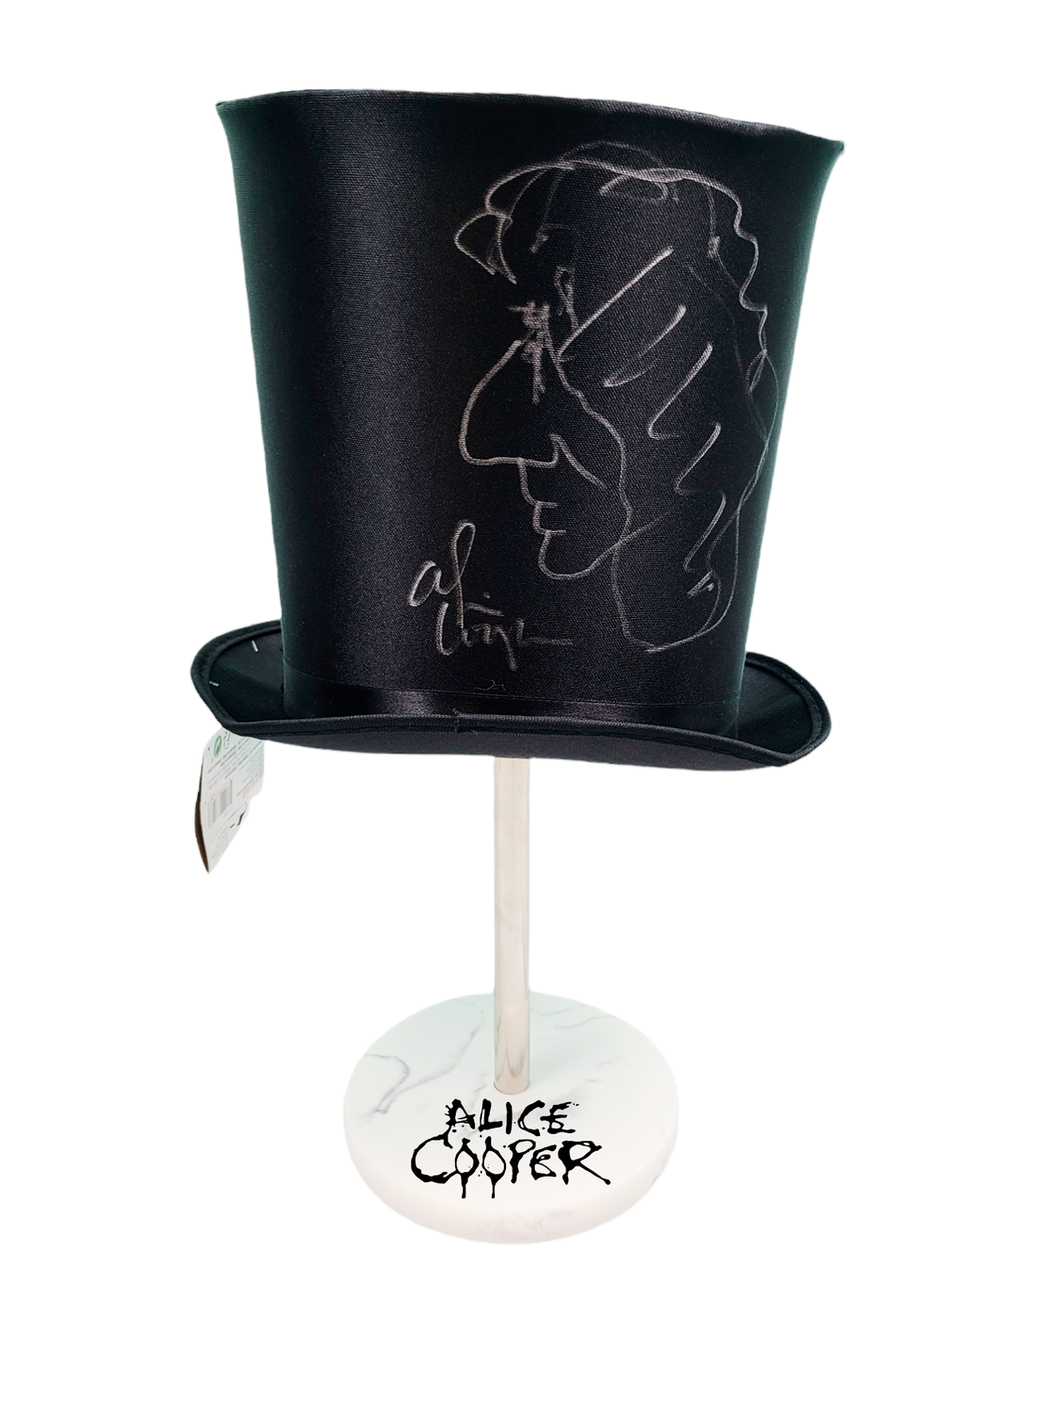 Alice Cooper Signed Tophat Full Sketch & Display Stand Exact Video Proof